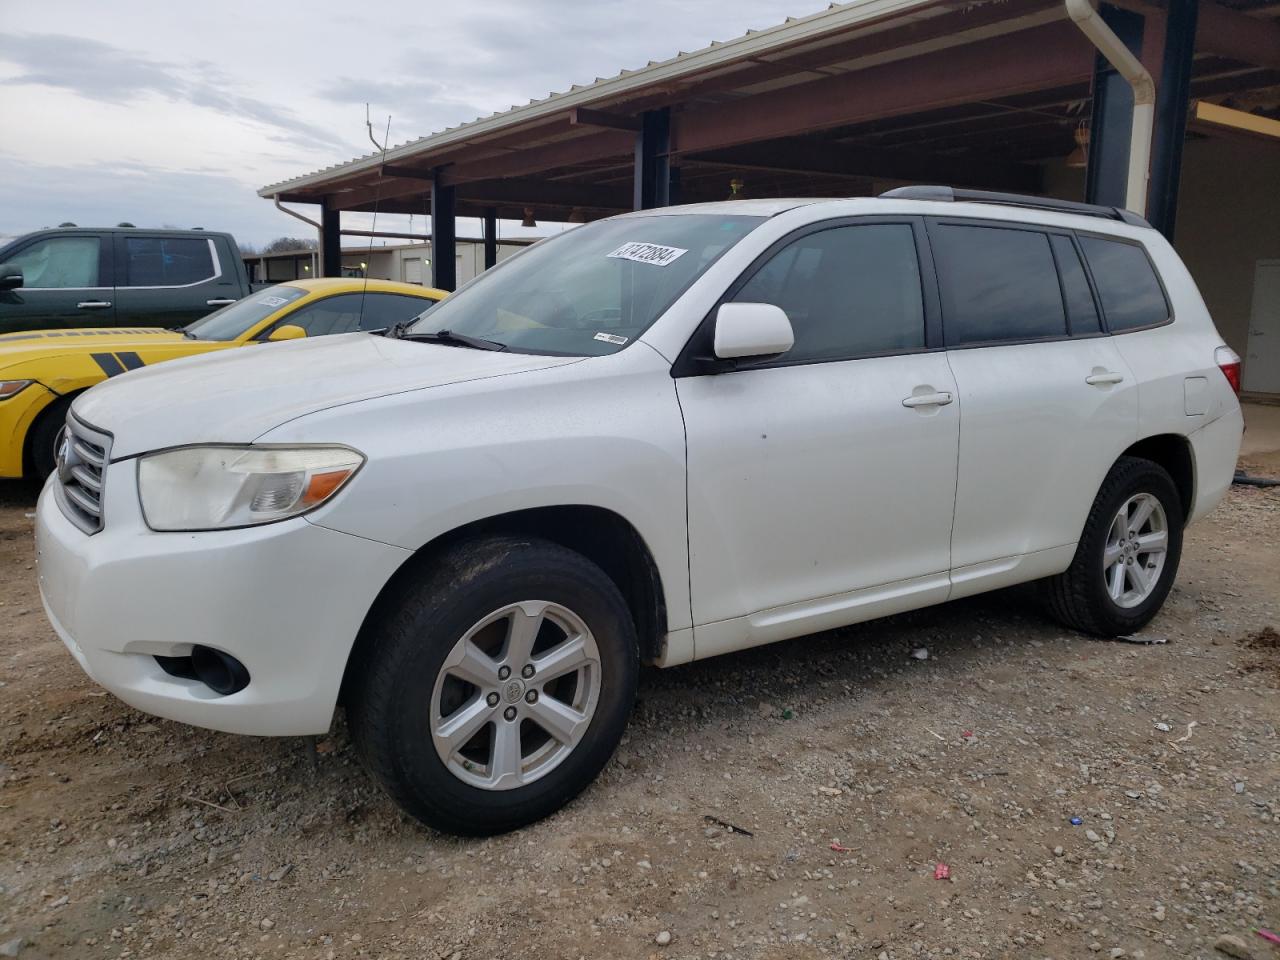 JTEZA3EH6A2****** Salvage and Wrecked 2010 Toyota Highlander in AL - Tanner